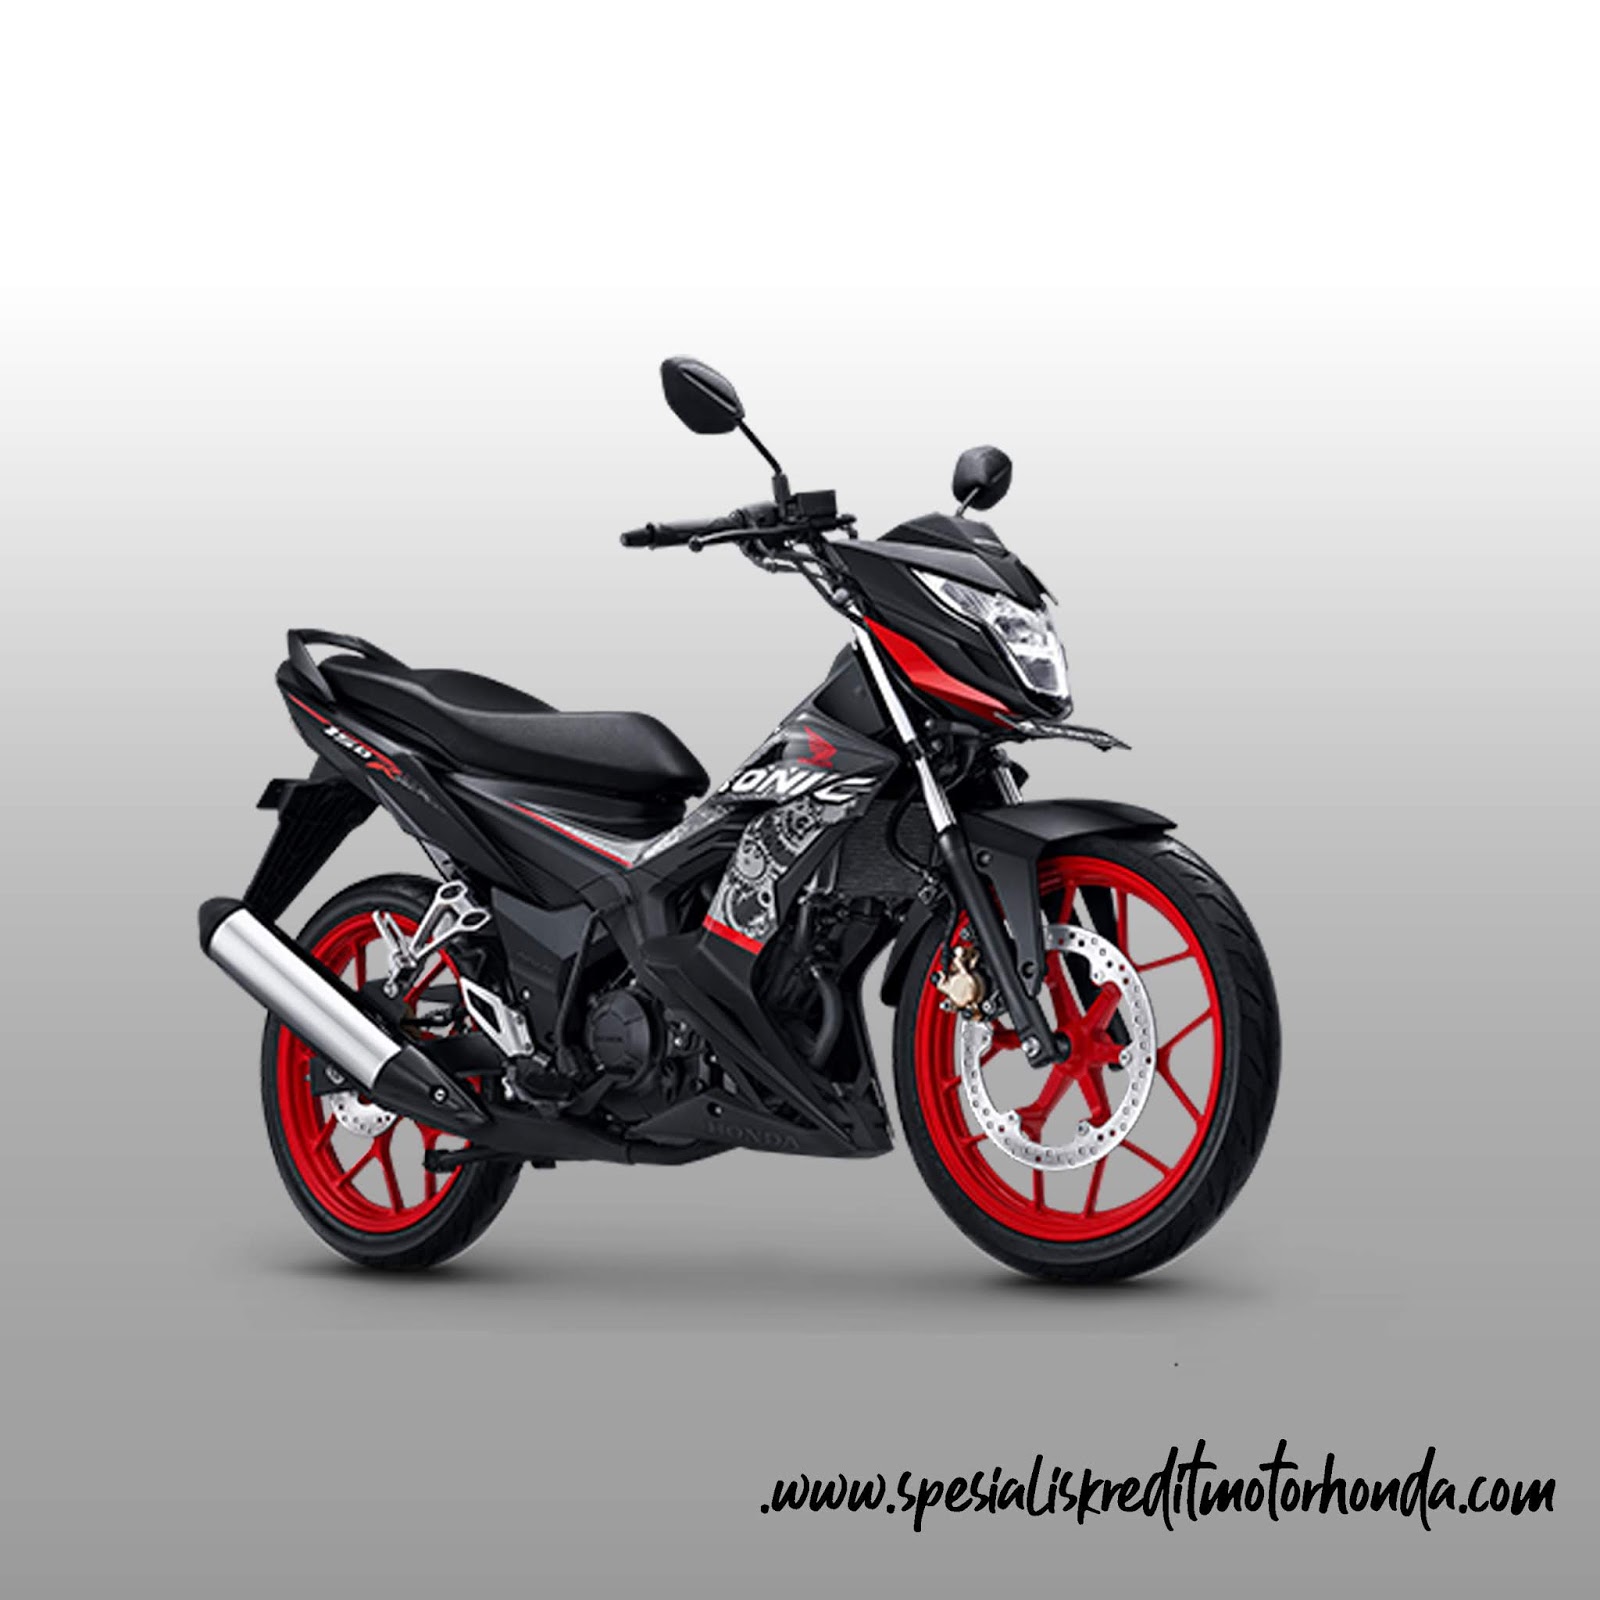 All Varian New Sonic 150r Special Edition 2020 Spesialis Kredit